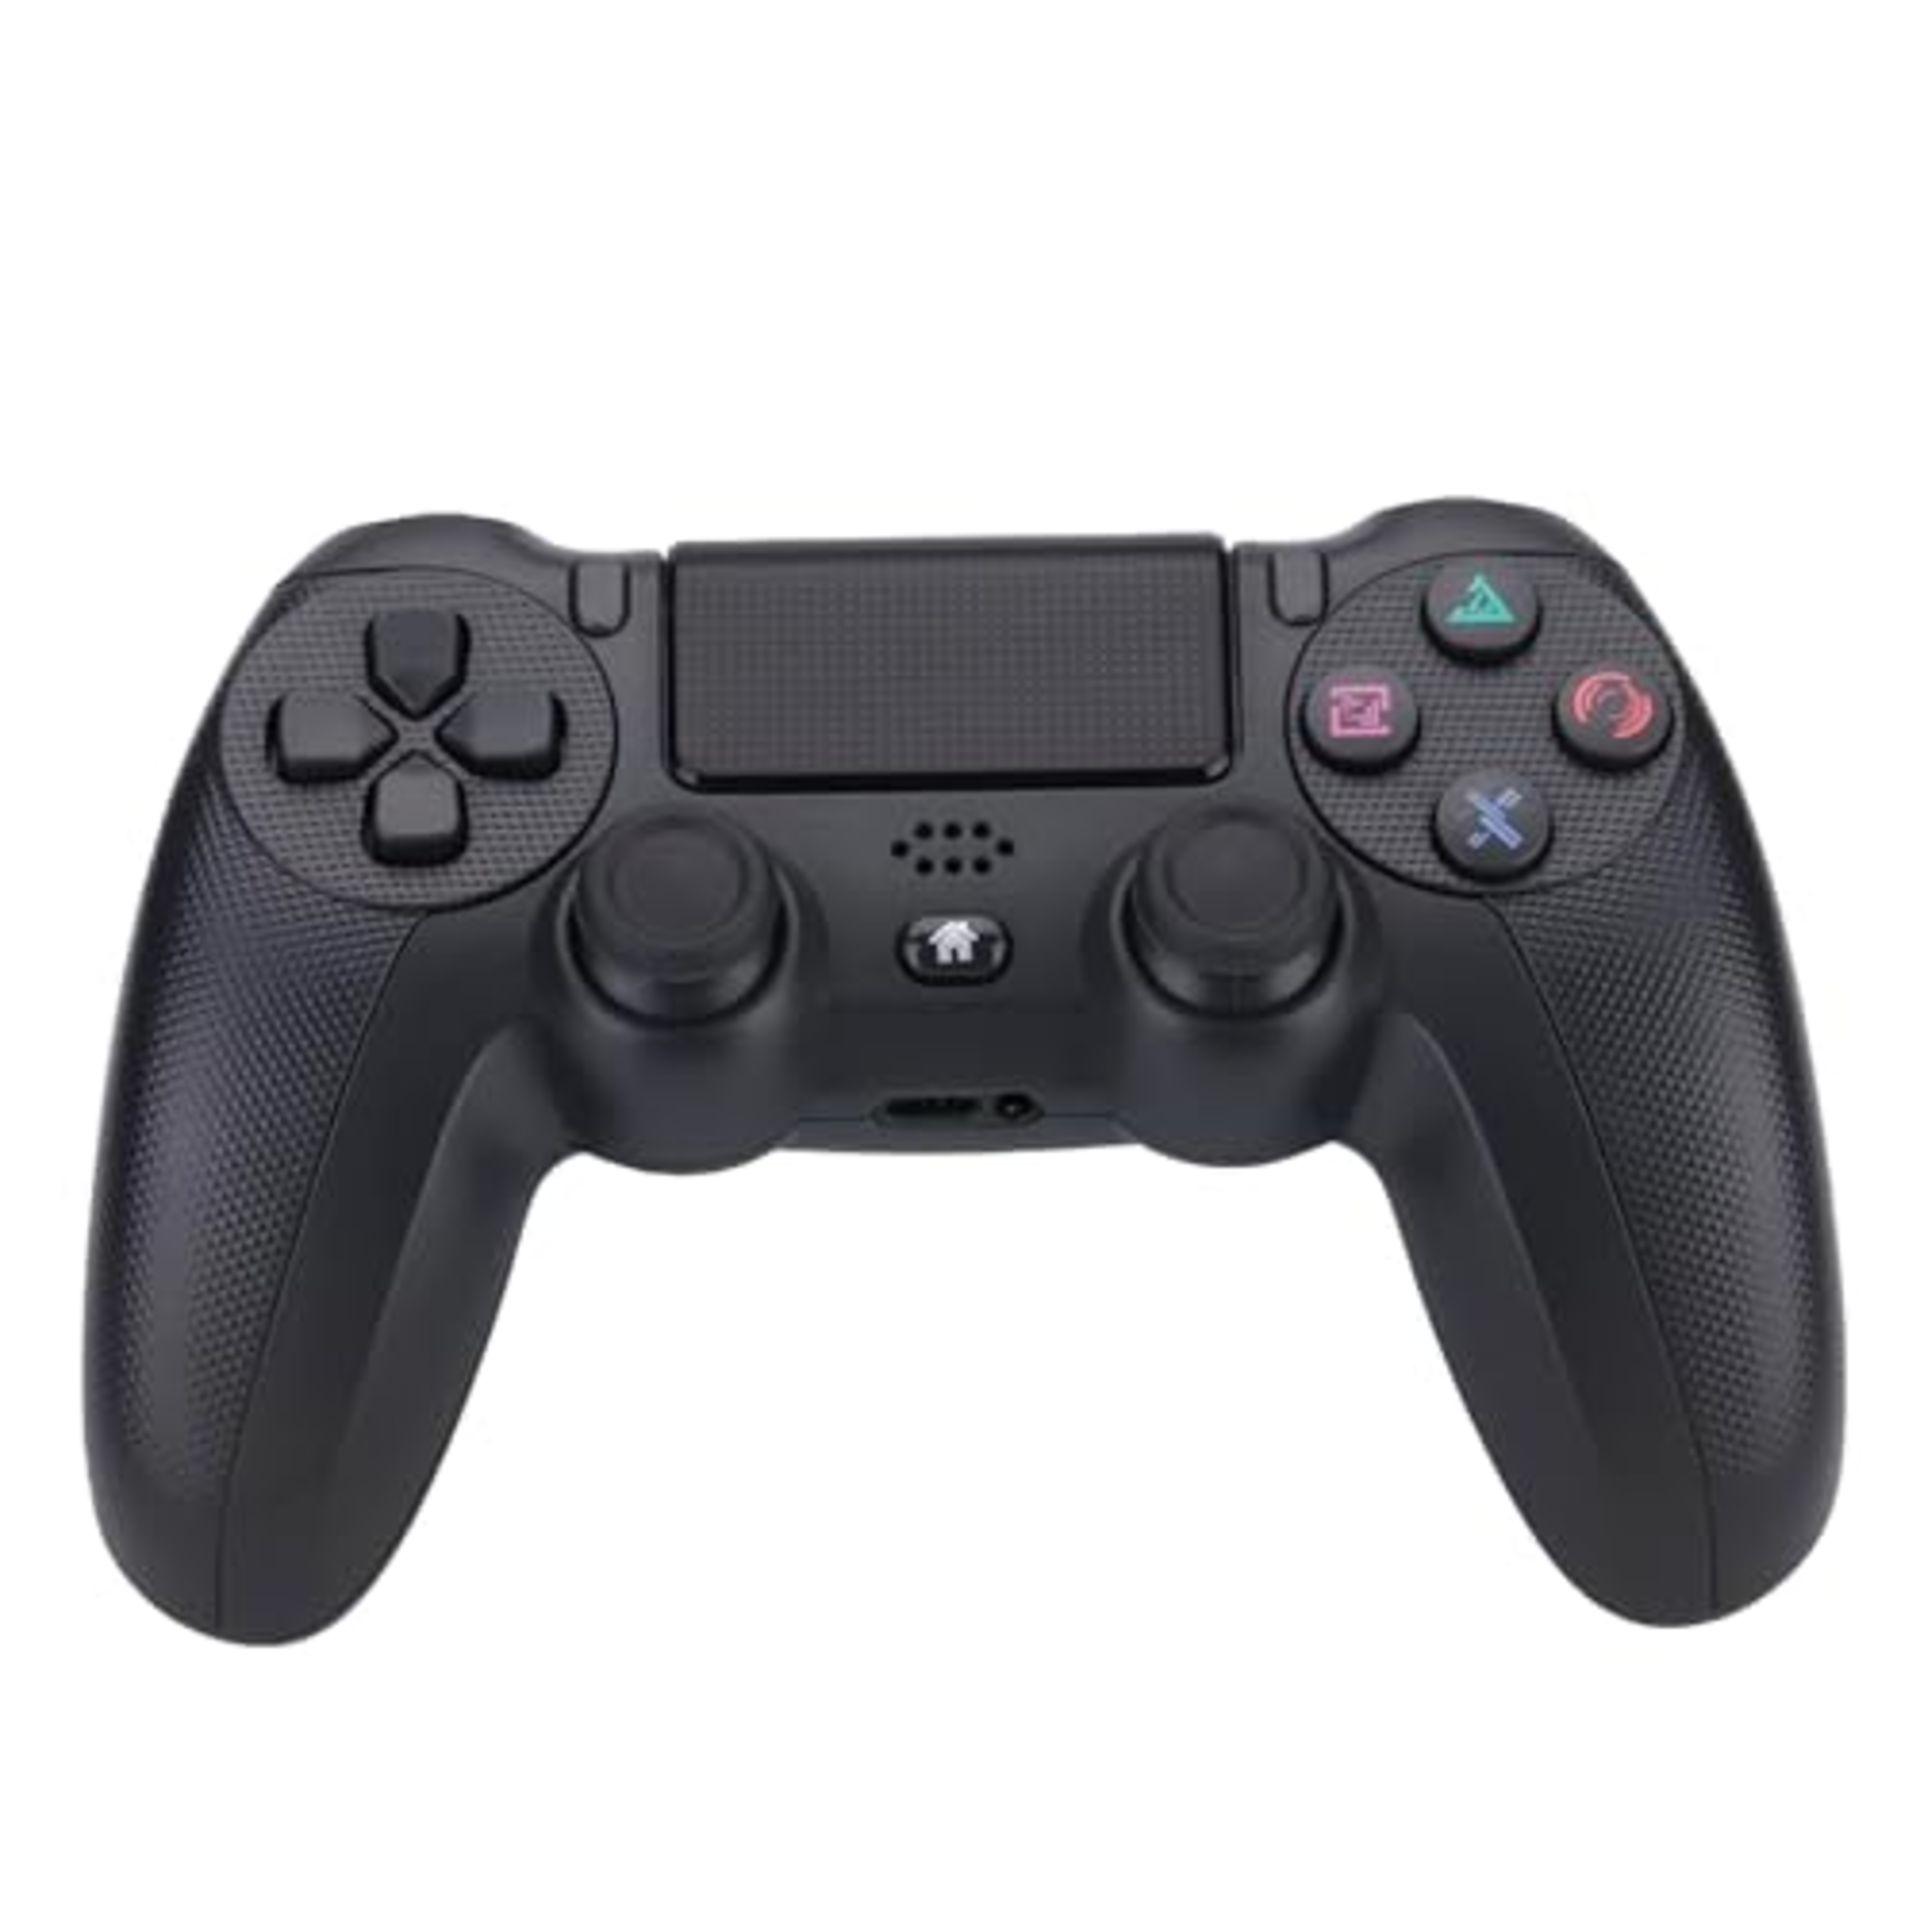 NK Mando for PS4 / PS3 / PC / Mobile Wireless Controller - Wireless Controller with Du